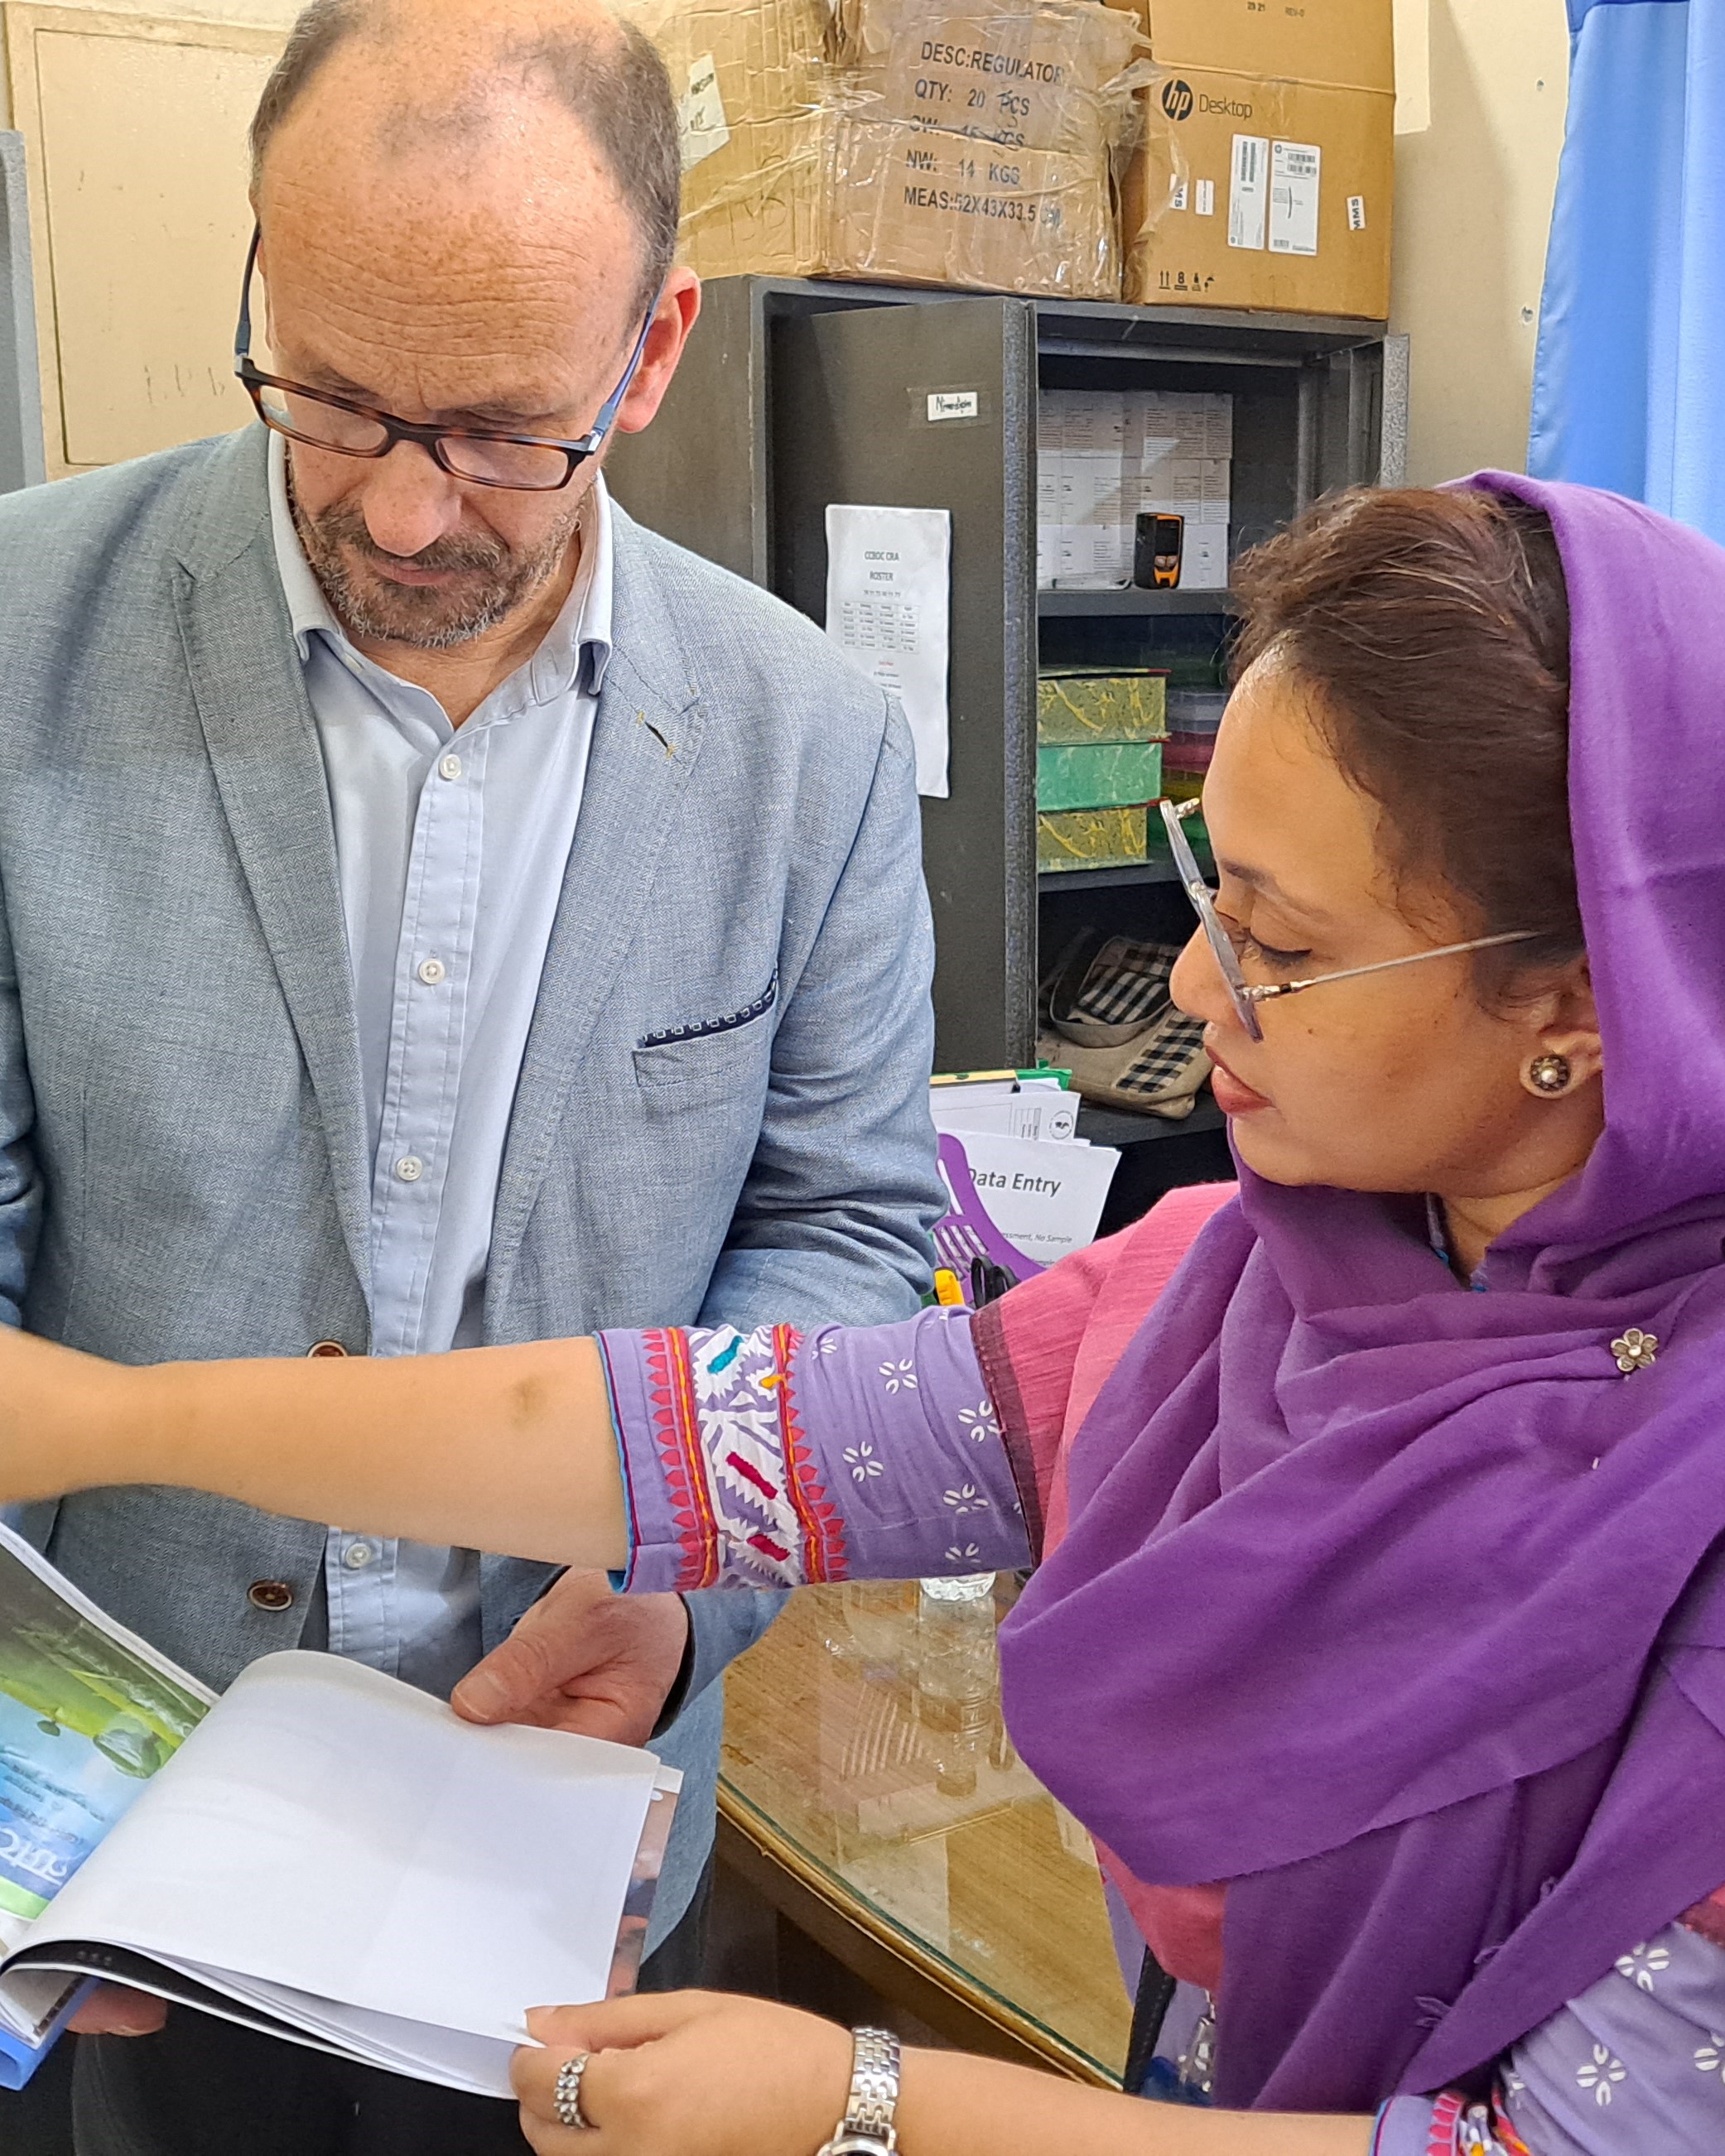 Professor Michael Eddleston reviewing documents with a female doctor in Bangladesh